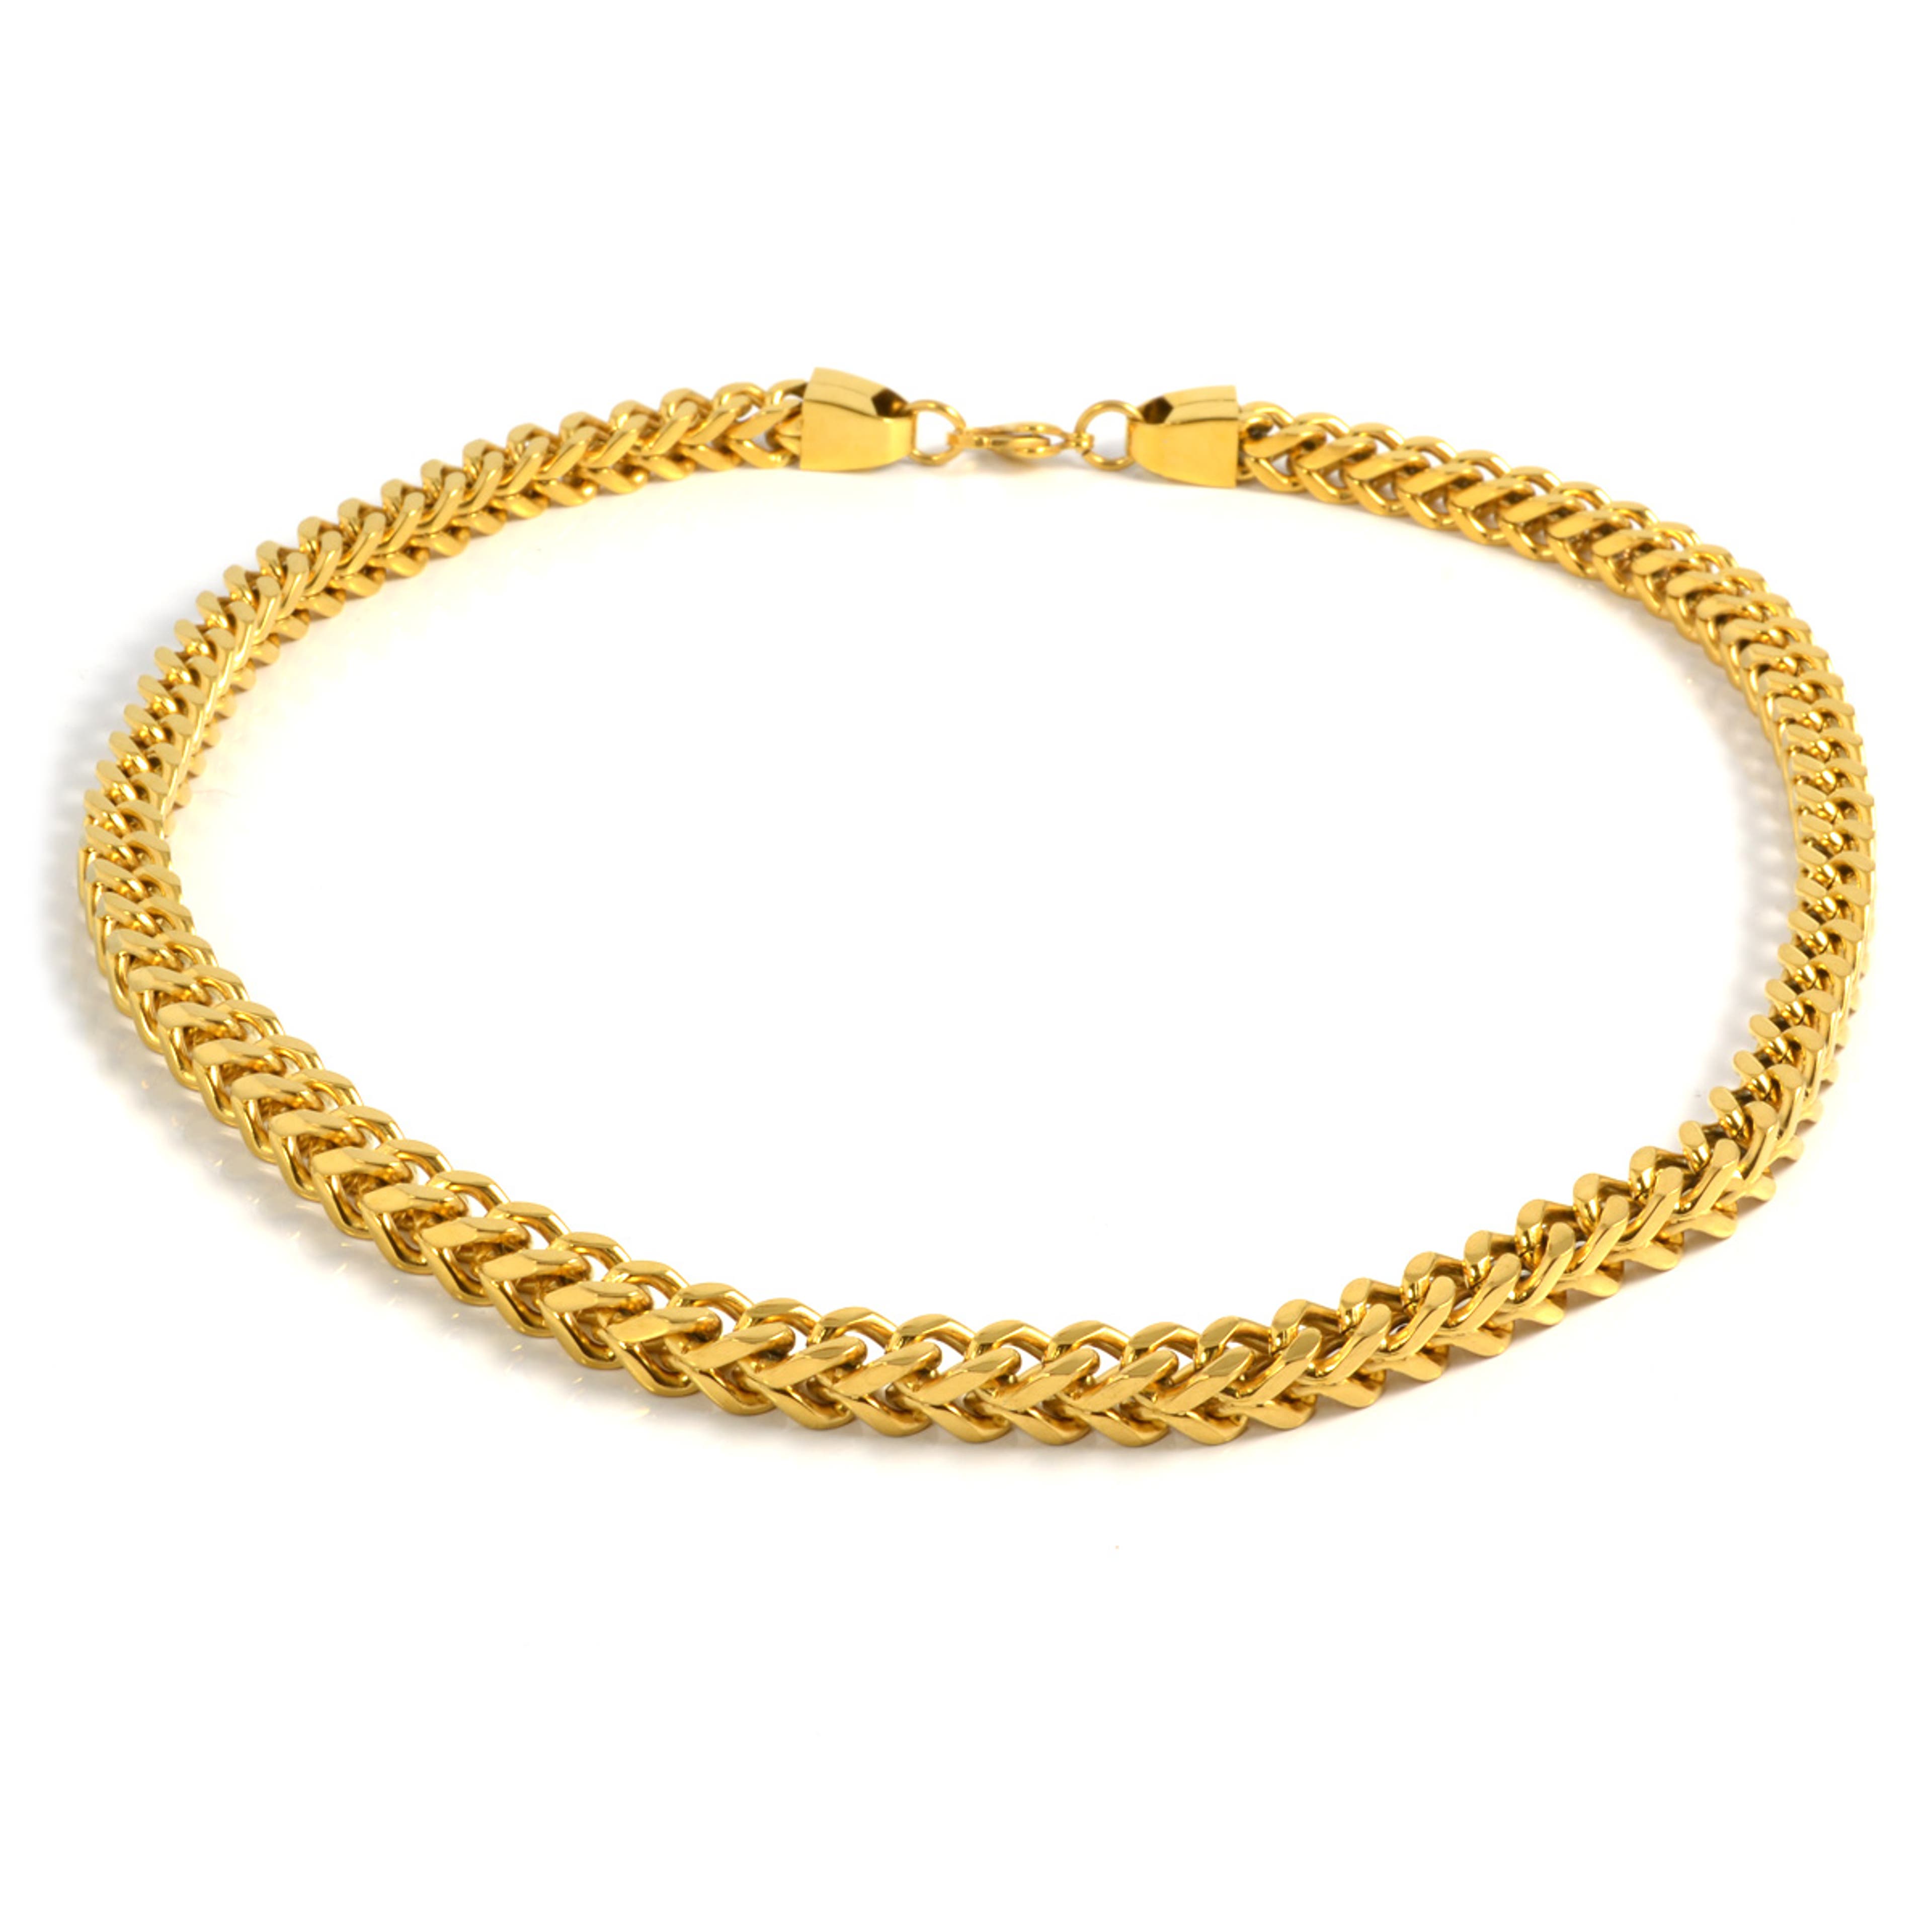 10 mm Gold-Tone Cuban Chain Necklace